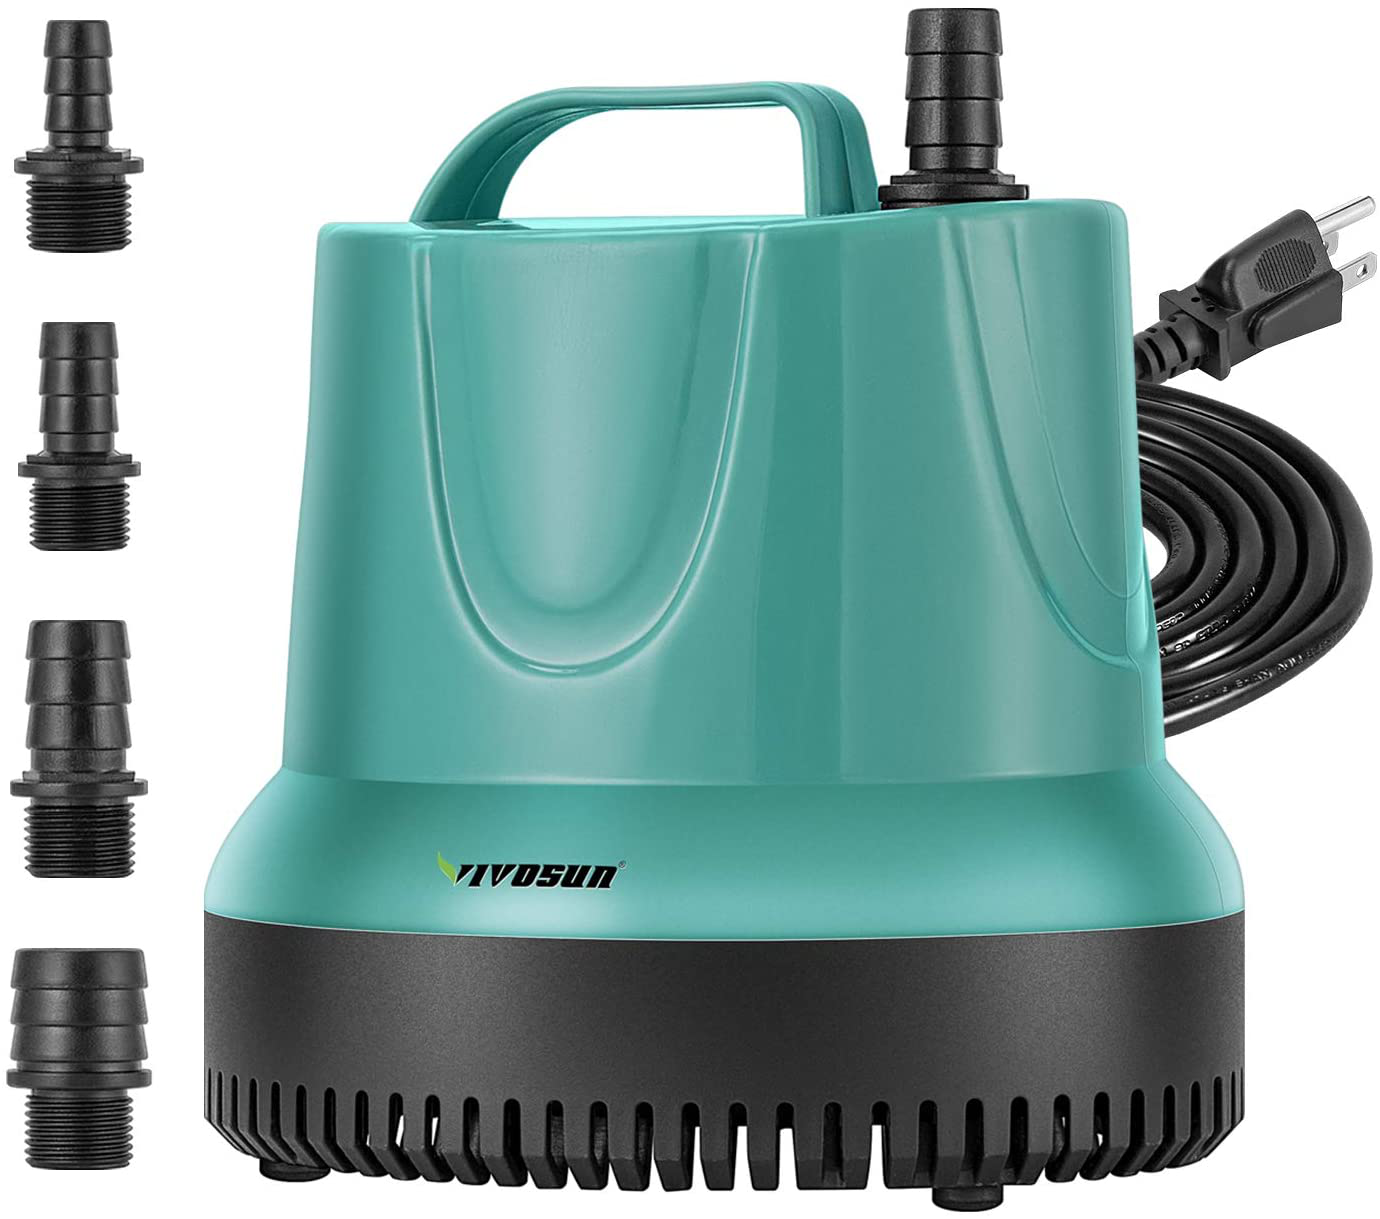 VIVOSUN 660GPH Submersible Pump (2500L/H, 40W), Ultra Quiet Water Pump with 8.2Ft High Lift, Fountain Pump with 5Ft Power Cord, 4 Nozzles for Fish Tank, Pond, Aquarium, Statuary, Hydroponics Animals & Pet Supplies > Pet Supplies > Fish Supplies > Aquarium & Pond Tubing VIVOSUN 60W  